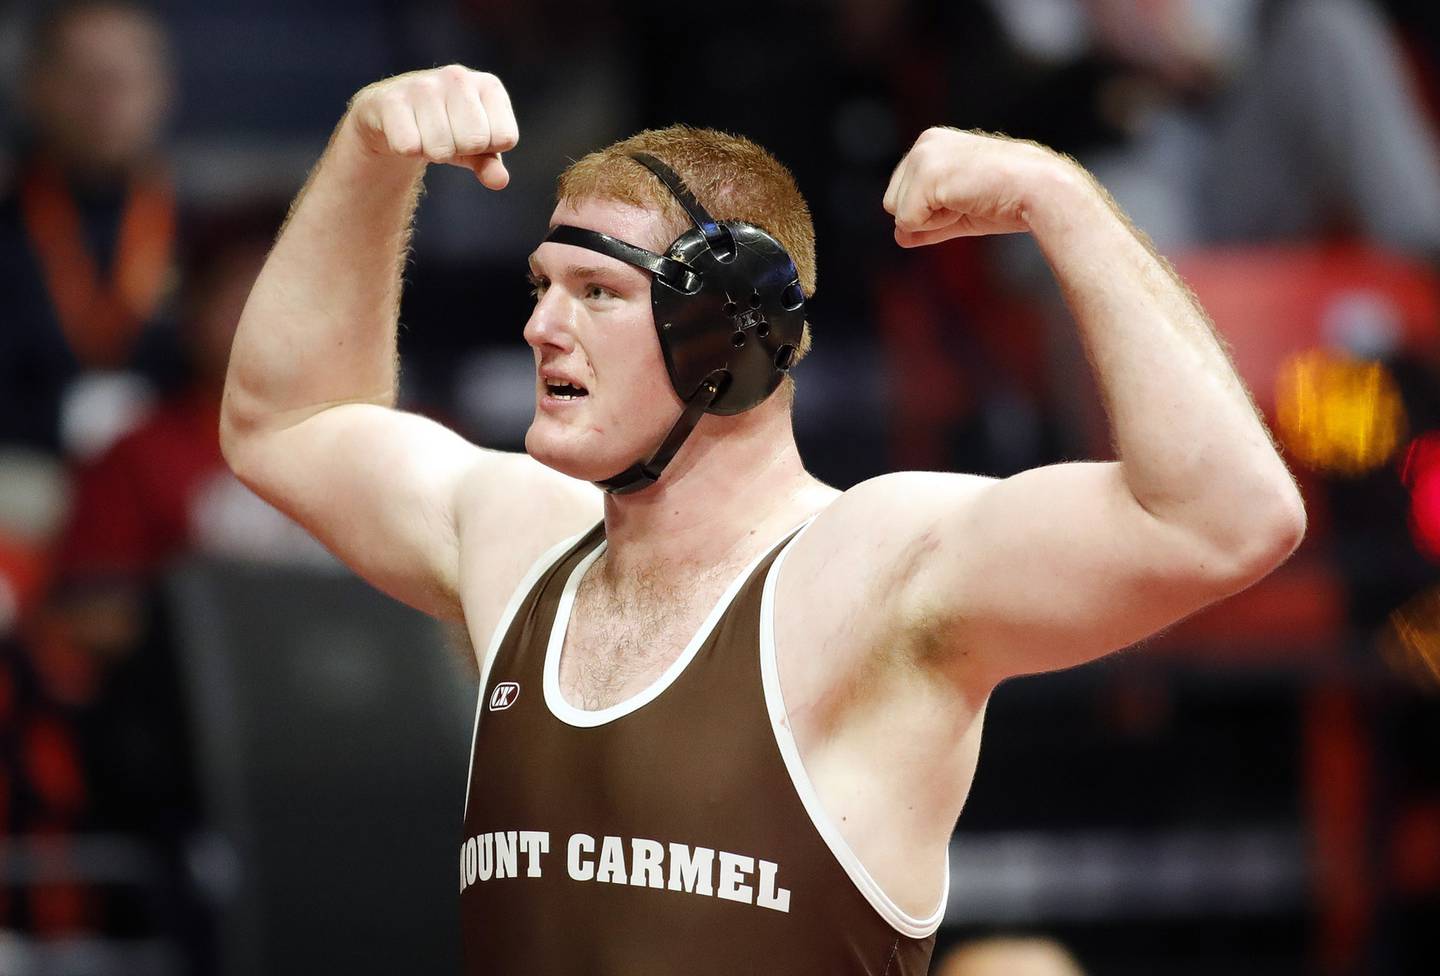 Mt. Carmel's Ryan Boersma reacts after winning the Class 3A state championship at 285 pounds at the State Farm Center in Champaign on Saturday, Feb. 19, 2022.